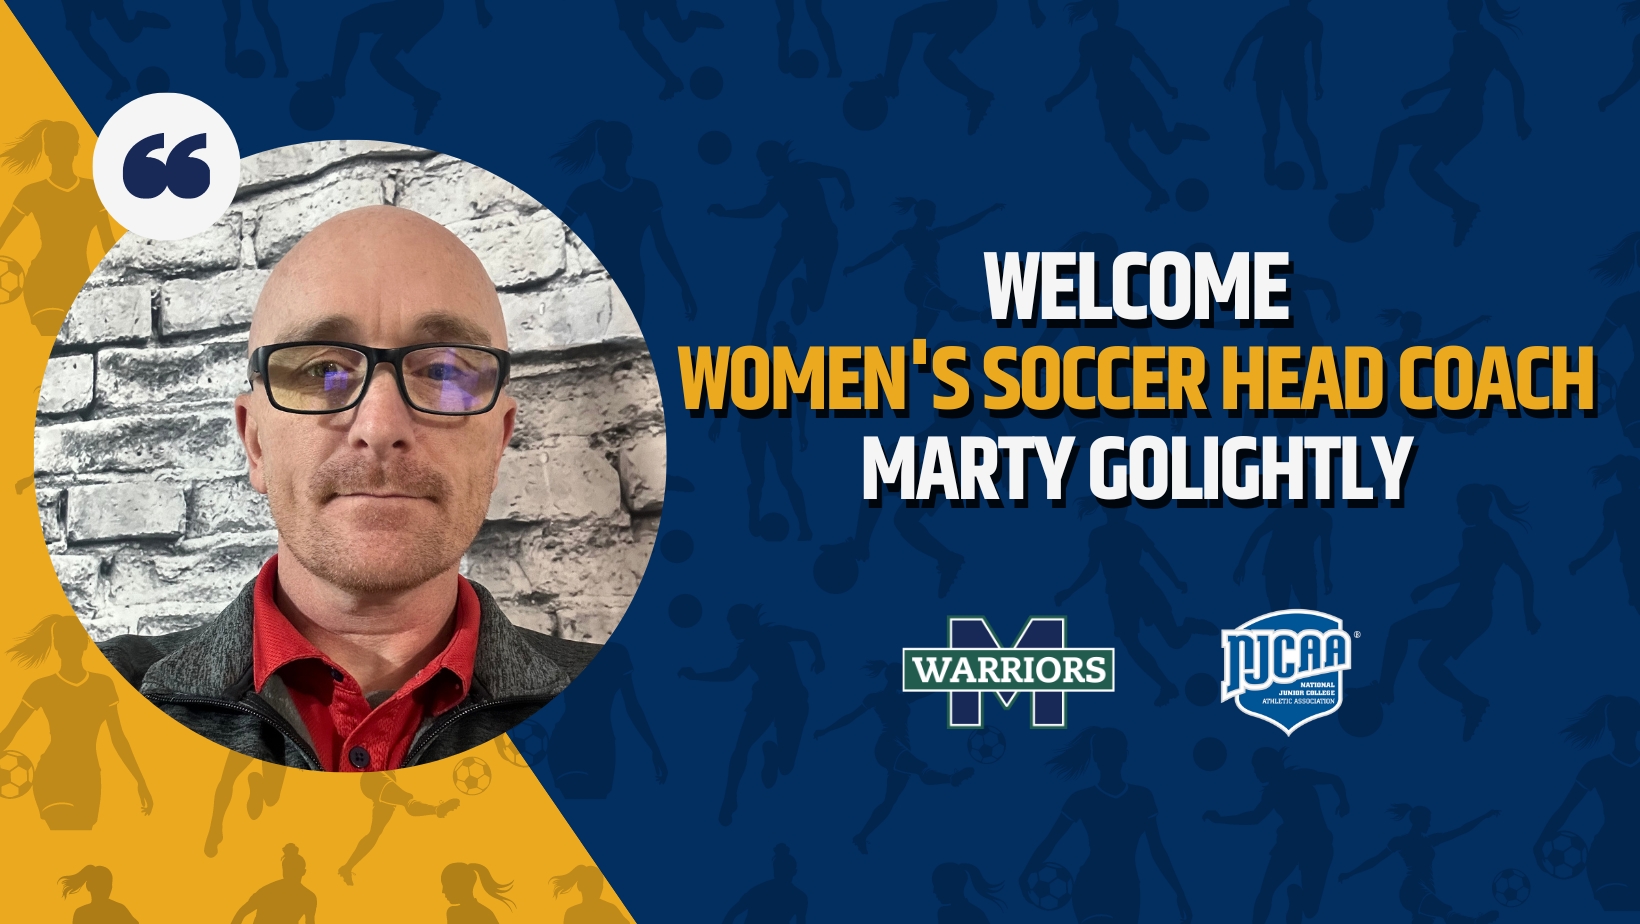 Warriors hire Marty Golightly as the new Women's Soccer Head Coach